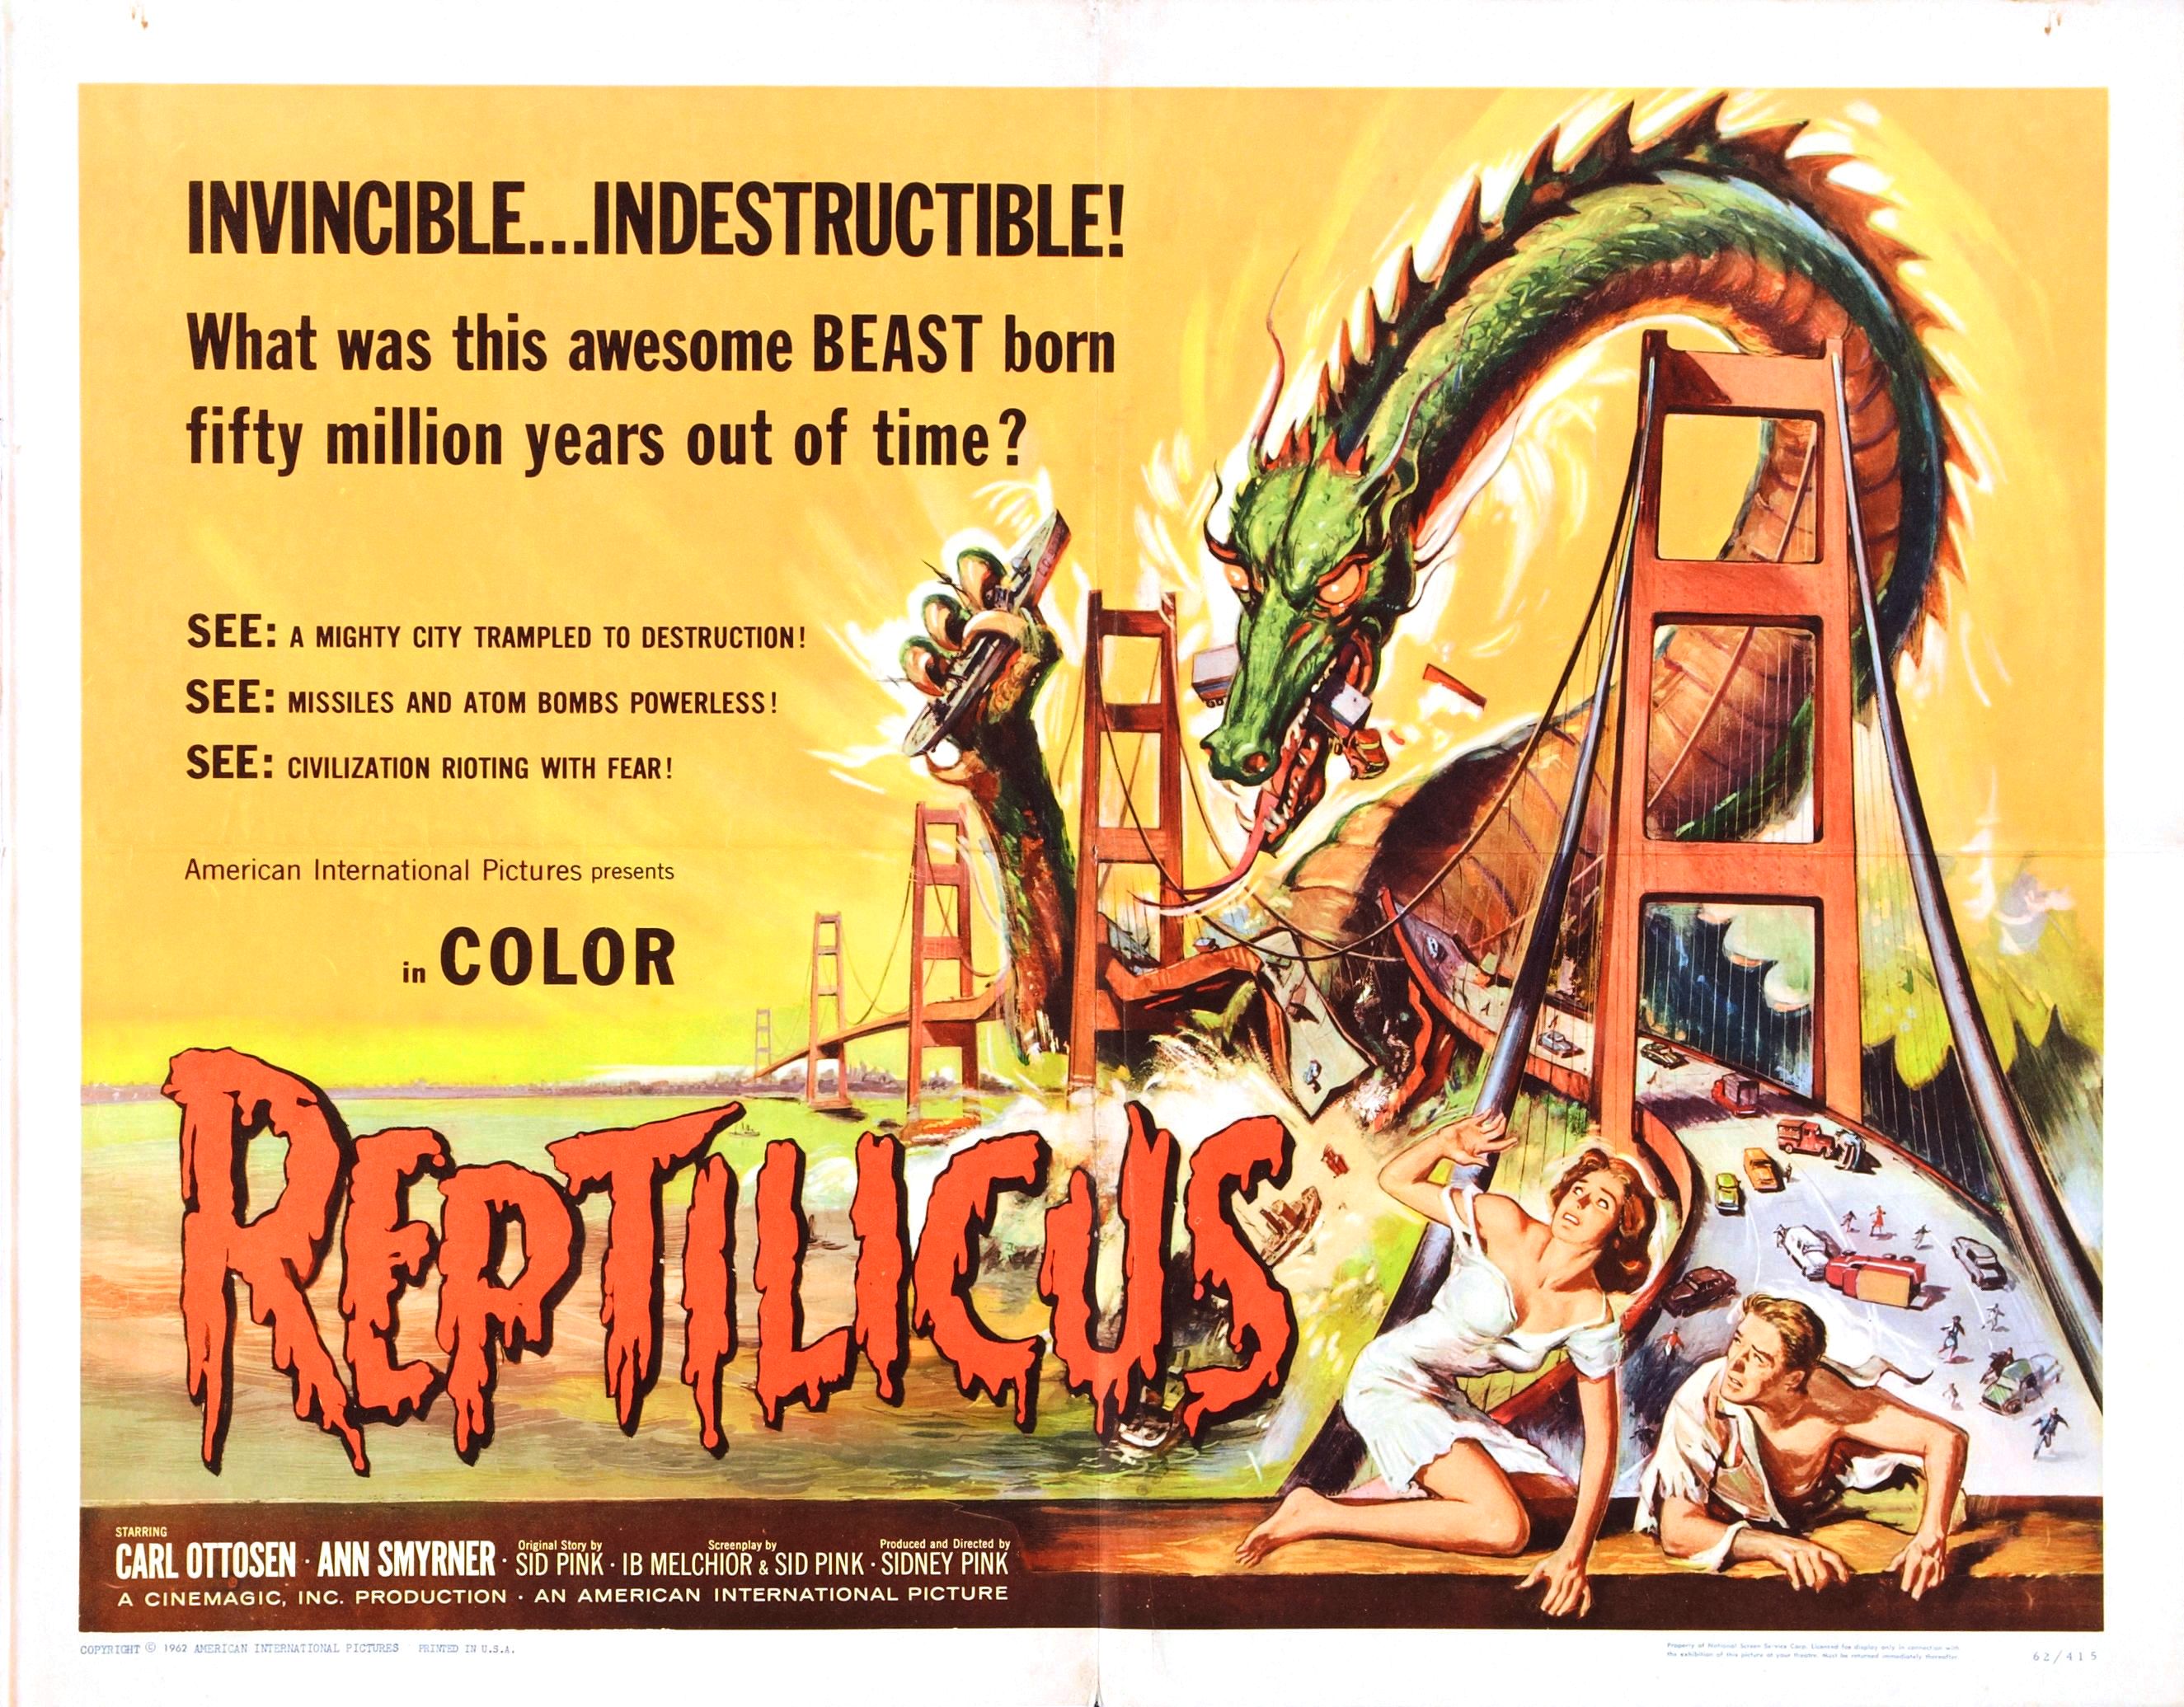 reptilicus film - Invincible...Indestructible! What was this awesome Beast born fifty million years out of time? See A Mighty City Trampled To Destruction! See Missiles And Atom Bombs Powerless! See Civilization Rooting With Fear! American International P